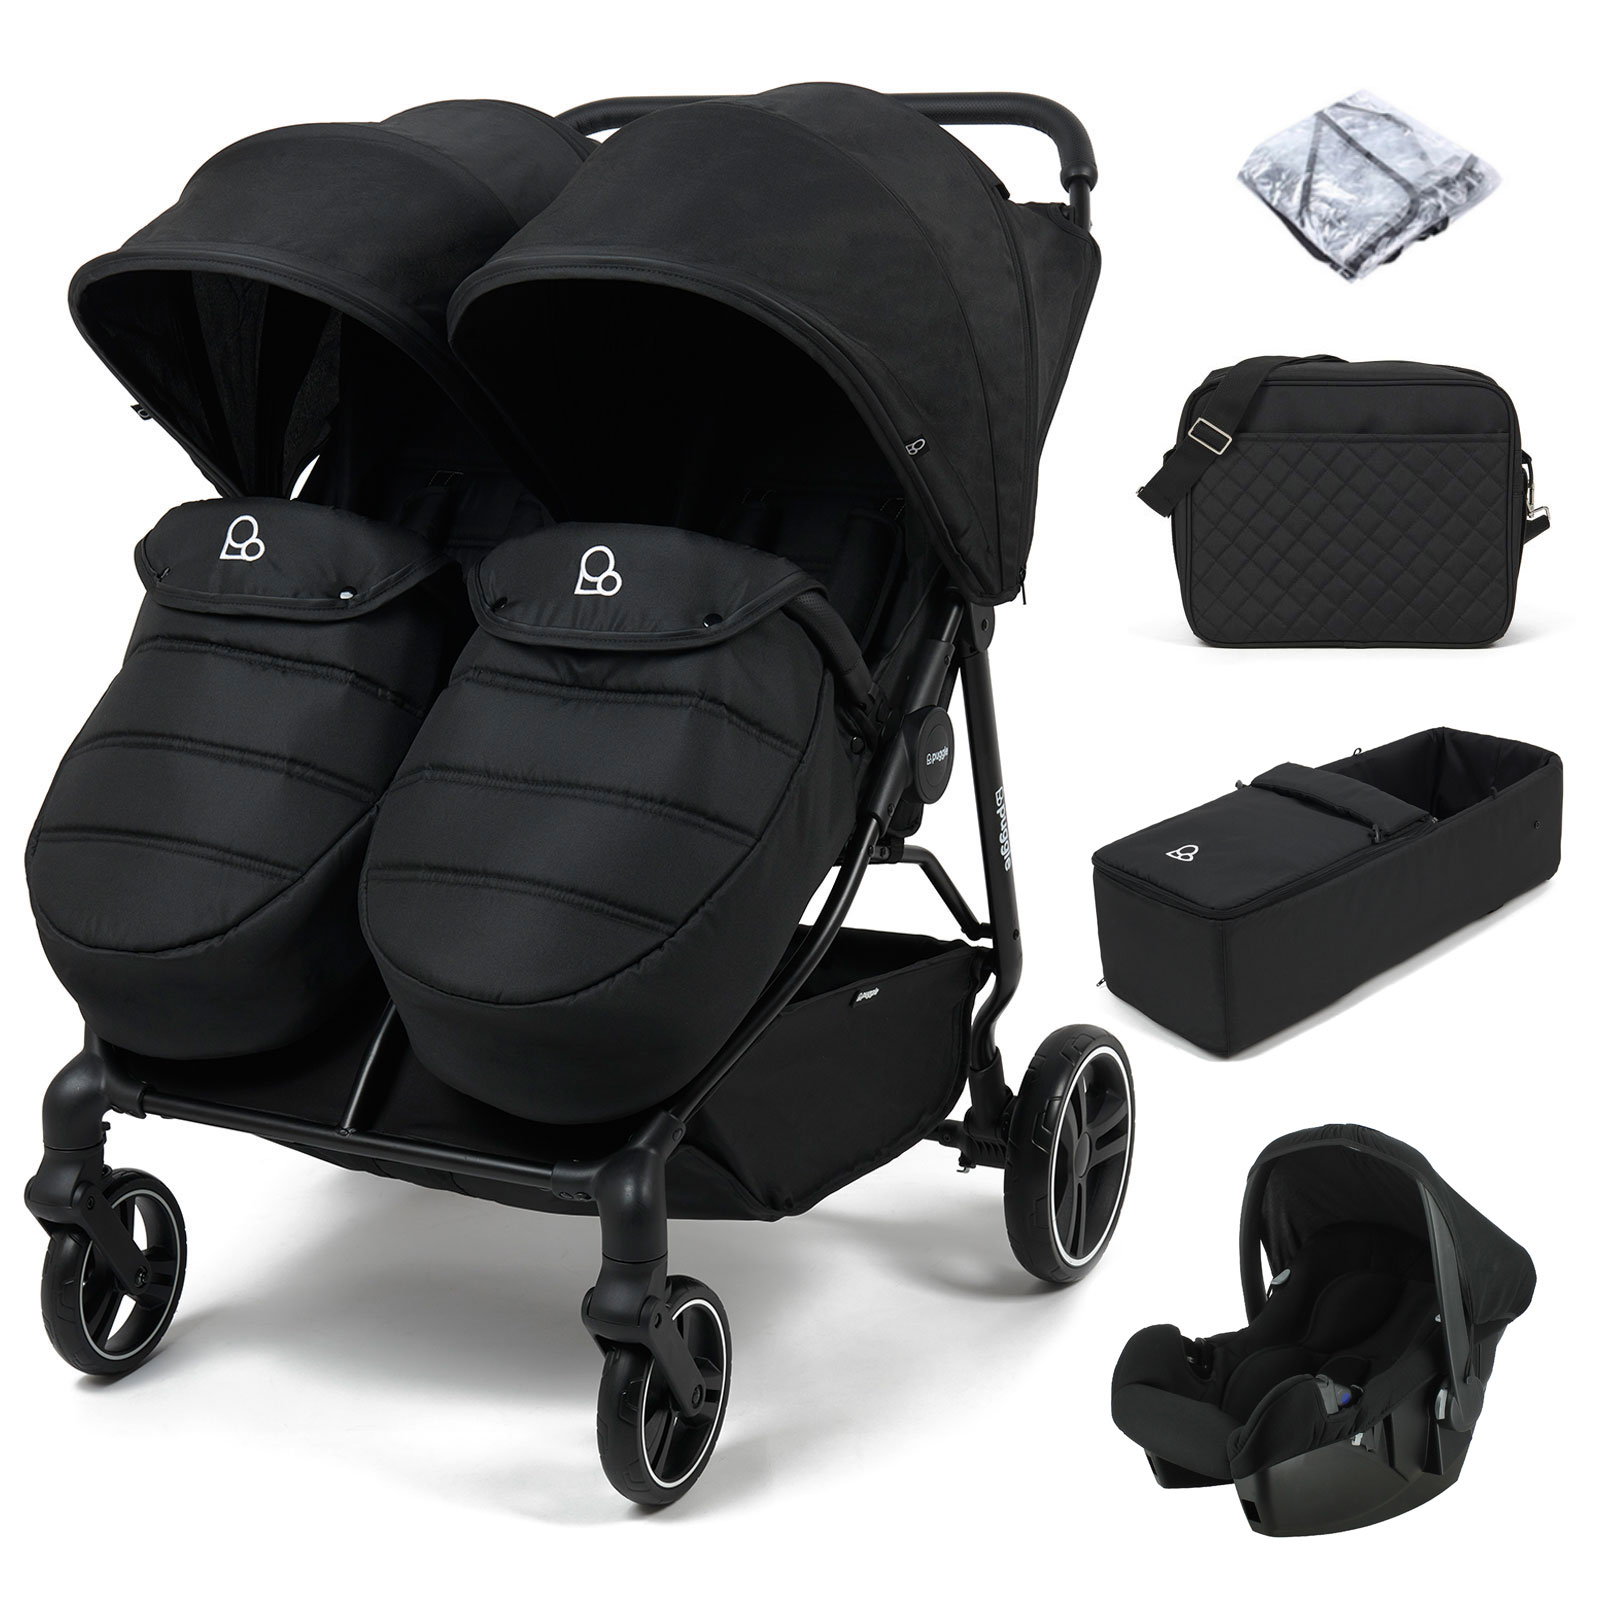 Puggle Urban City Easyfold Twin Pushchair with Footmuffs, Beone Car Seat, Carrycot & Changing Bag - Storm Black